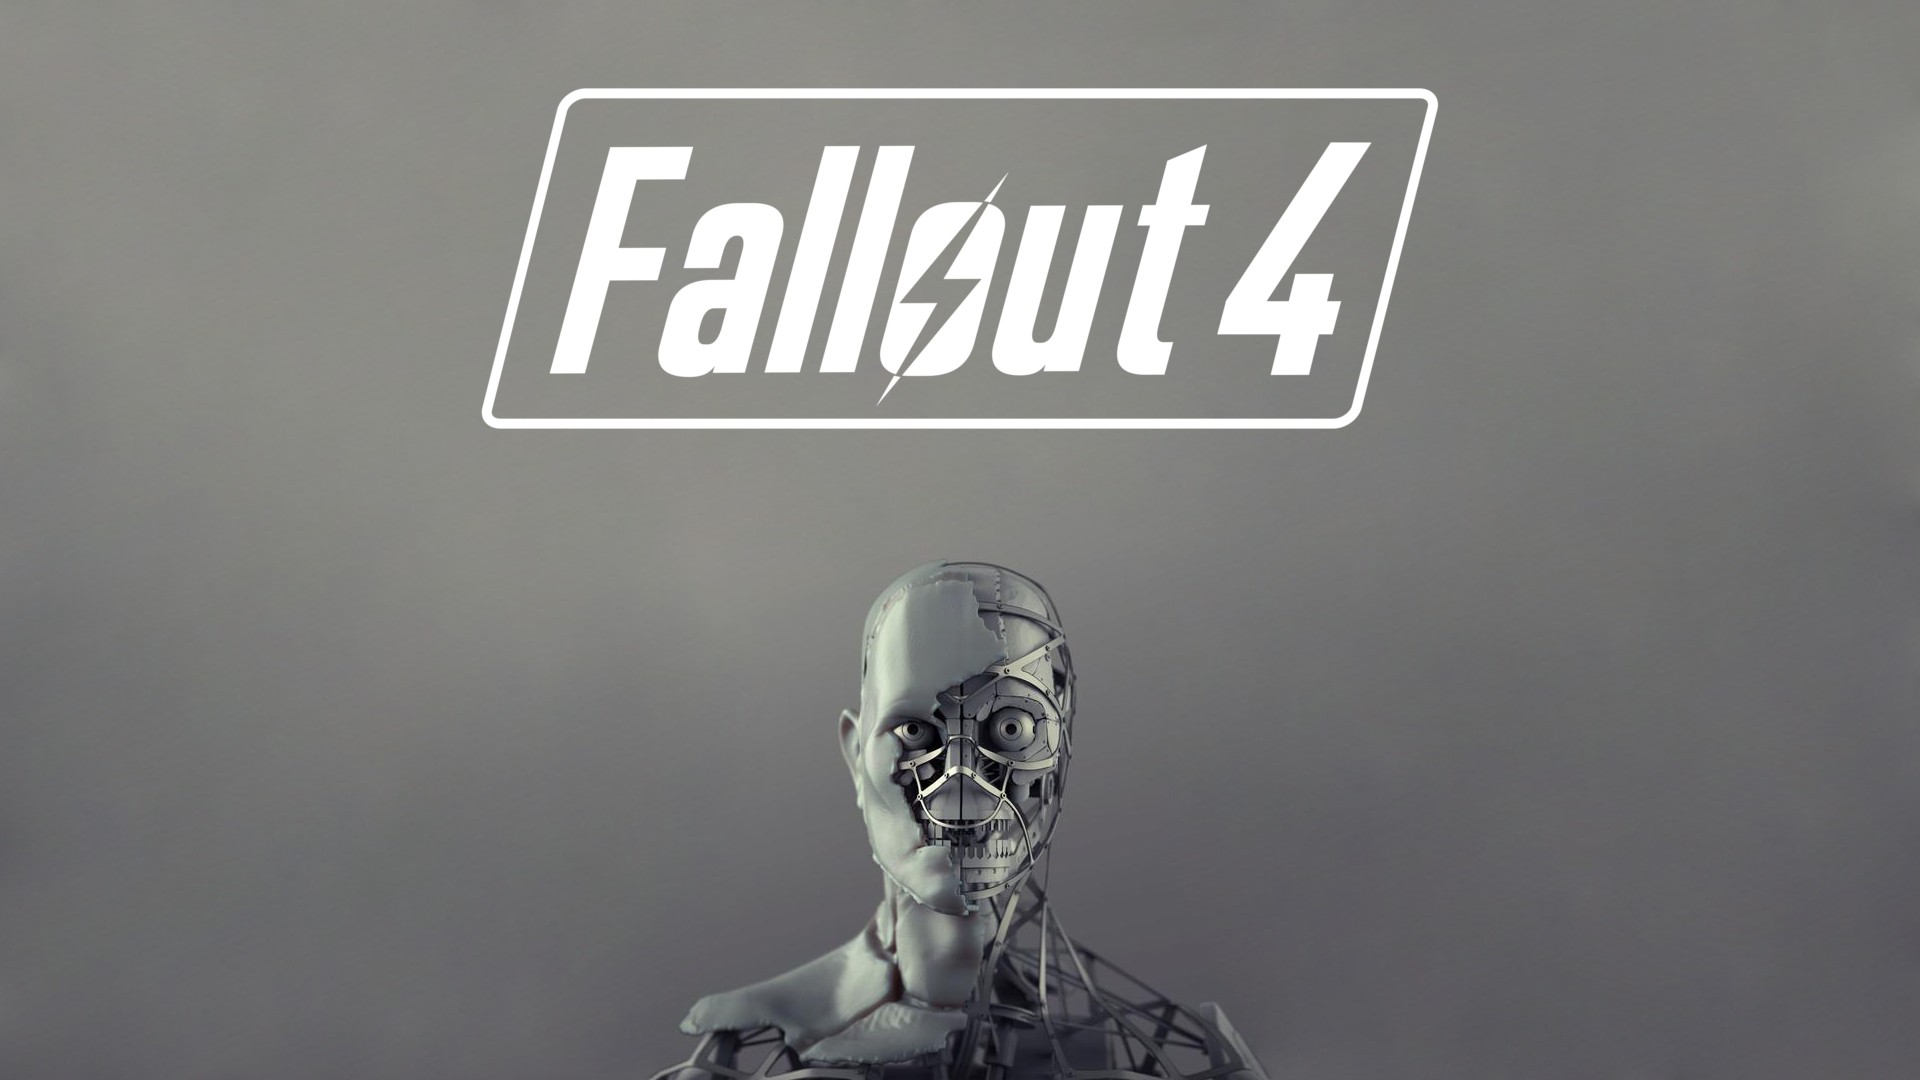 Fallout 4, Bethesda Softworks, Fallout, Synth Wallpaper